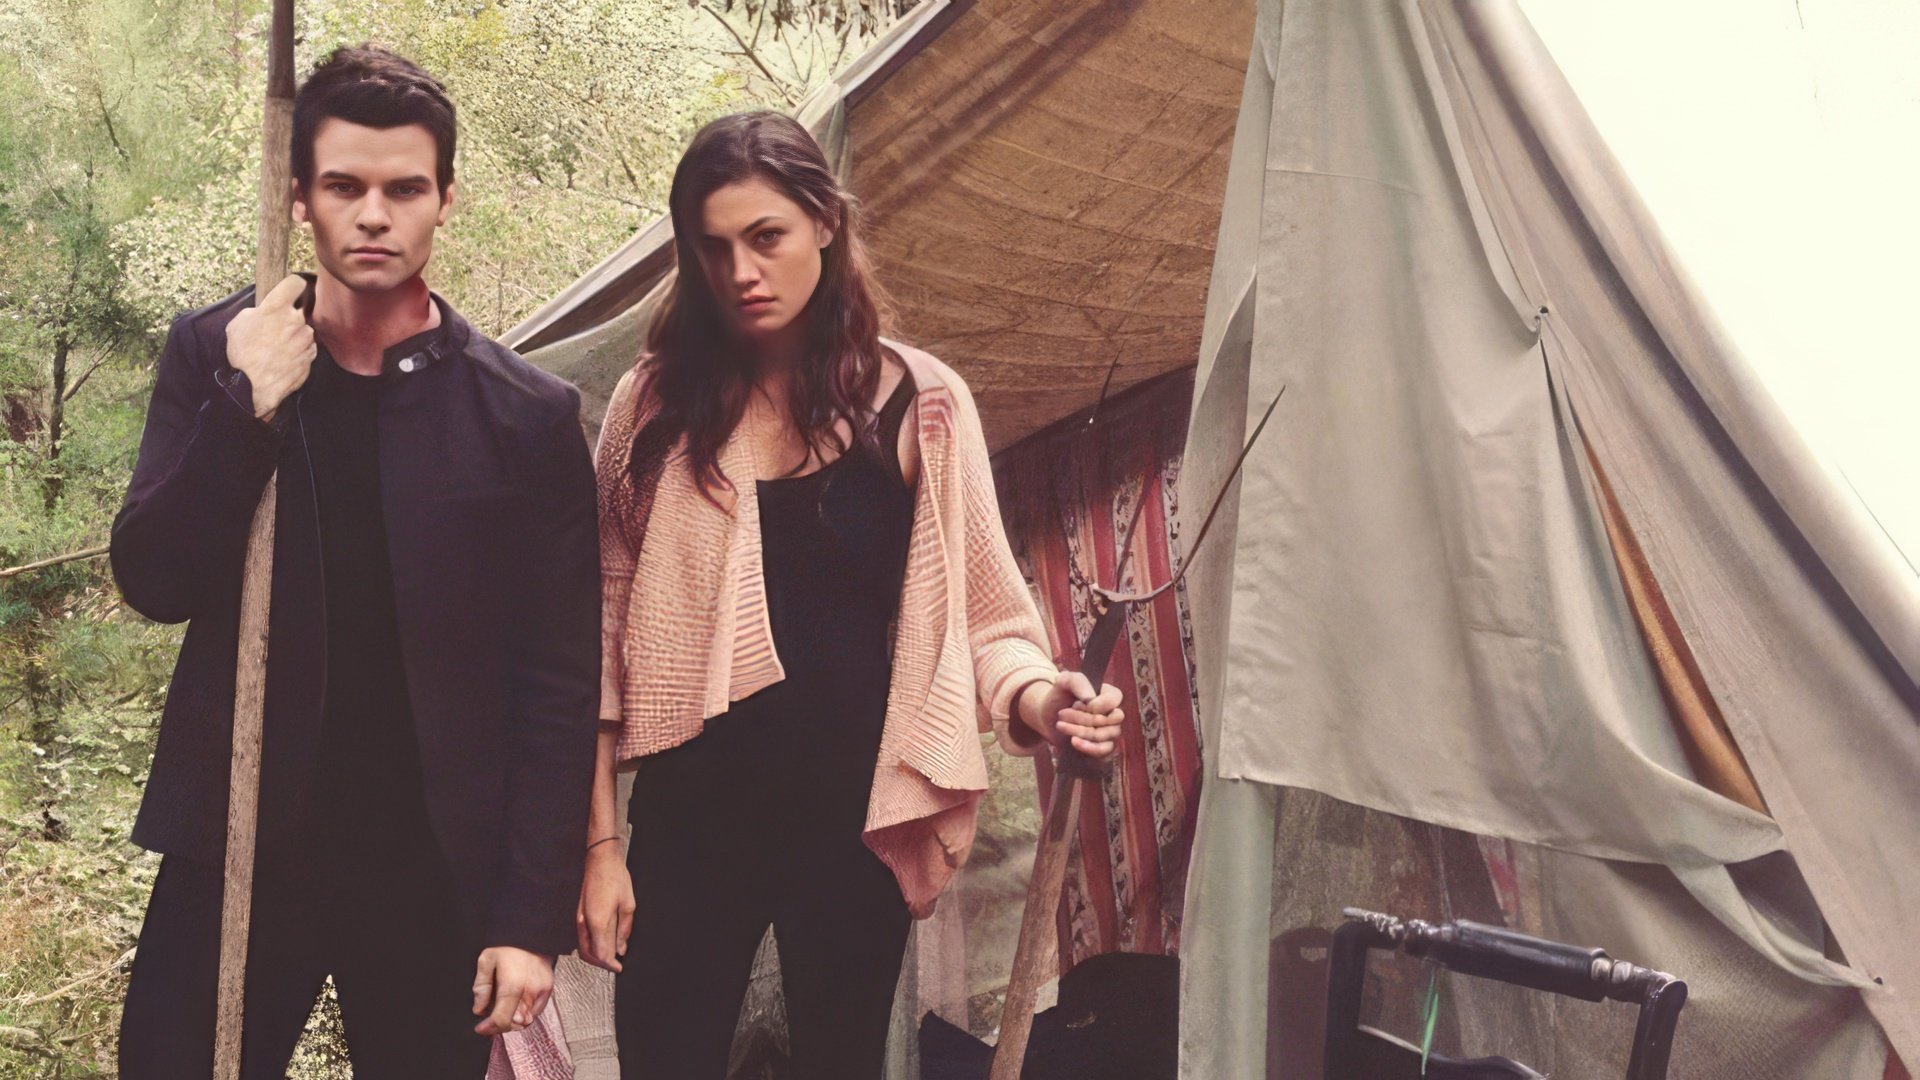 Phoebe Tonkin on the set of 'The Originals'